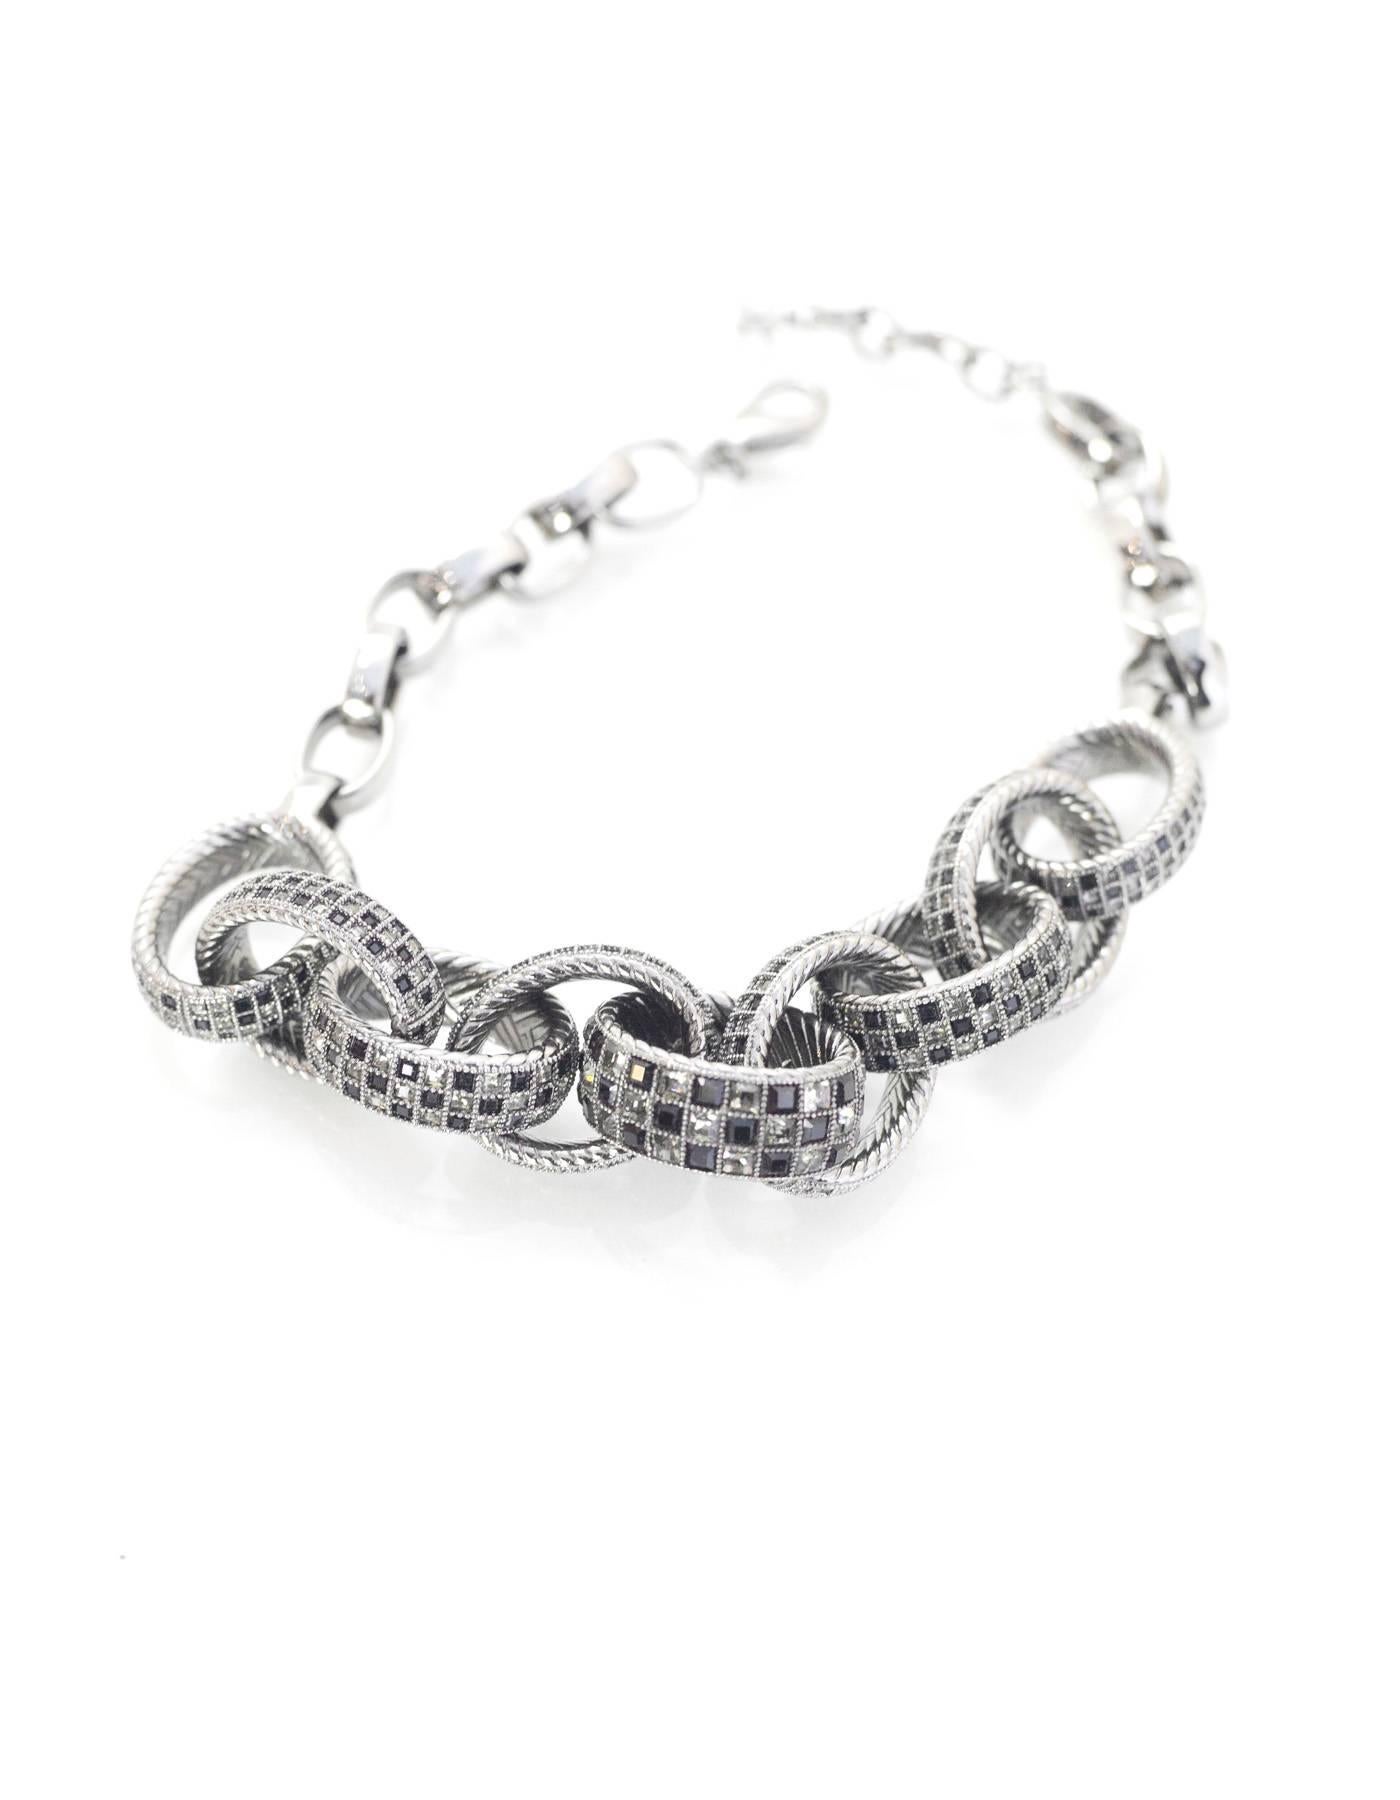 Chanel Black & Grey Crystal Chain Link Choker Necklace

Made In: France
Year of Production: 2016
Color: Ruthenium black and grey
Materials: Metal and crystal
Closure: Lobster claw clasp
Stamp: A16 CC S
Overall Condition: Excellent pre-owned